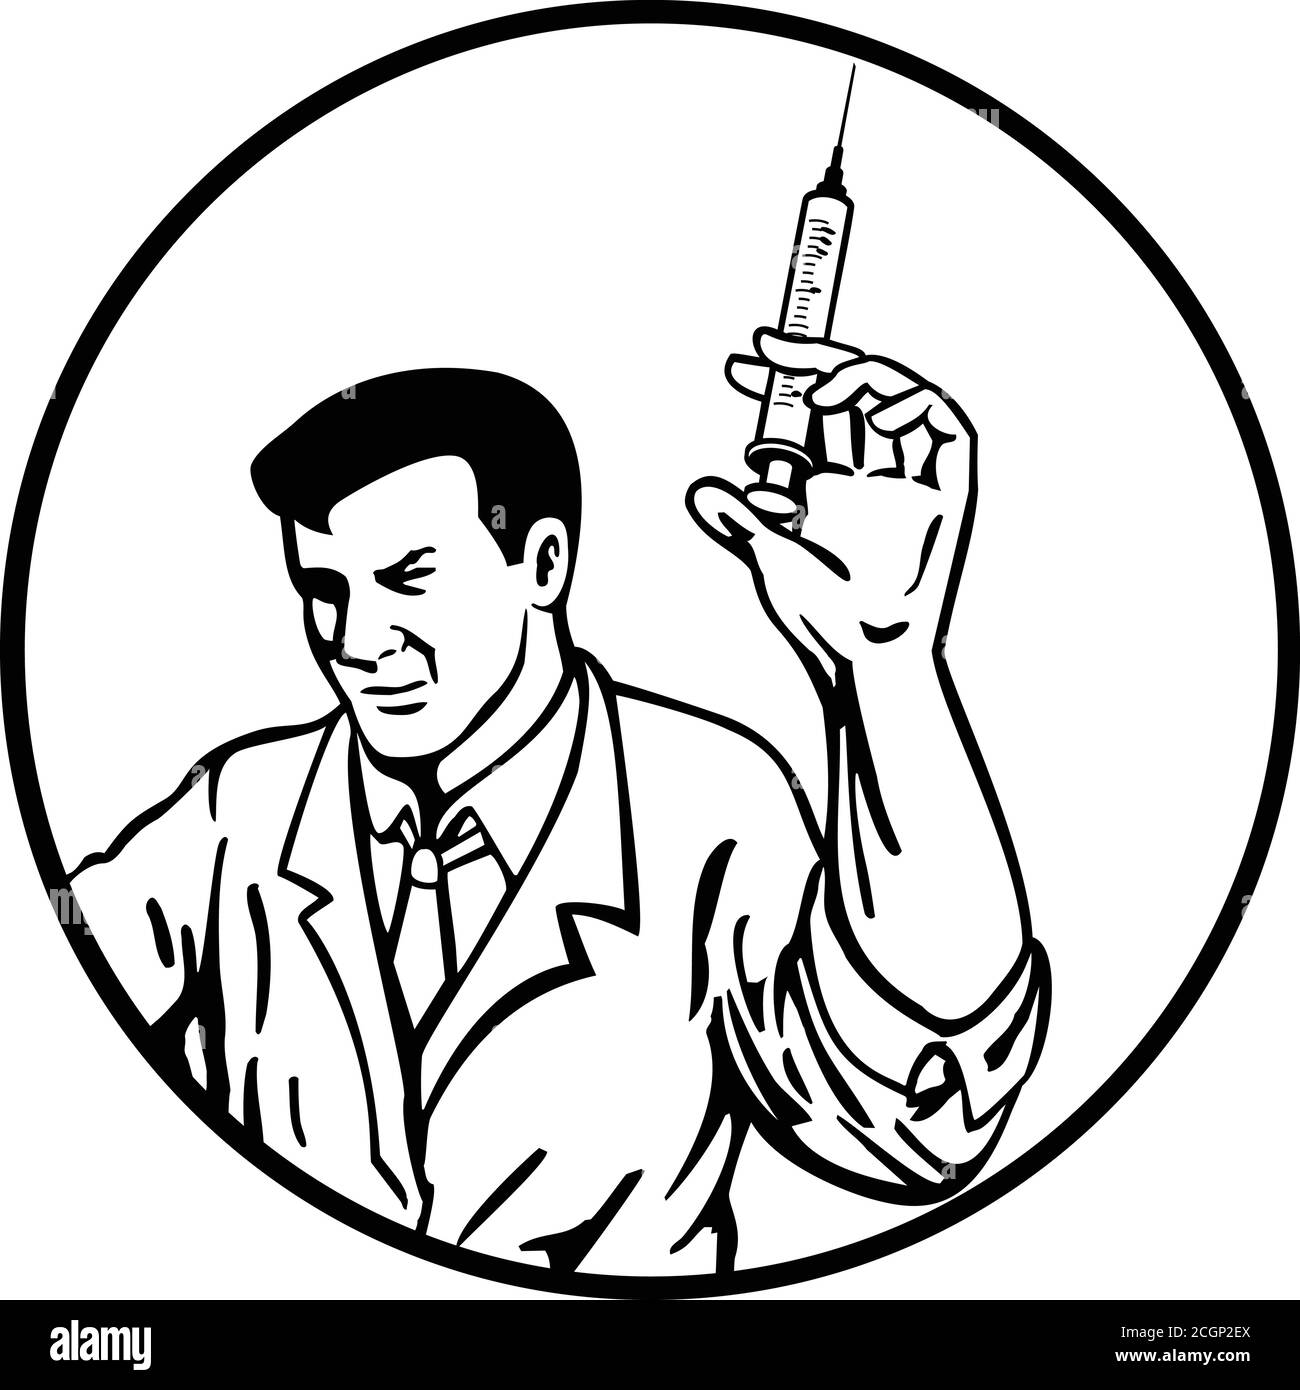 Retro style illustration of a medical doctor, nurse, medical worker or scientist wearing lab coat holding up a syringe with vaccine on set inside circ Stock Vector